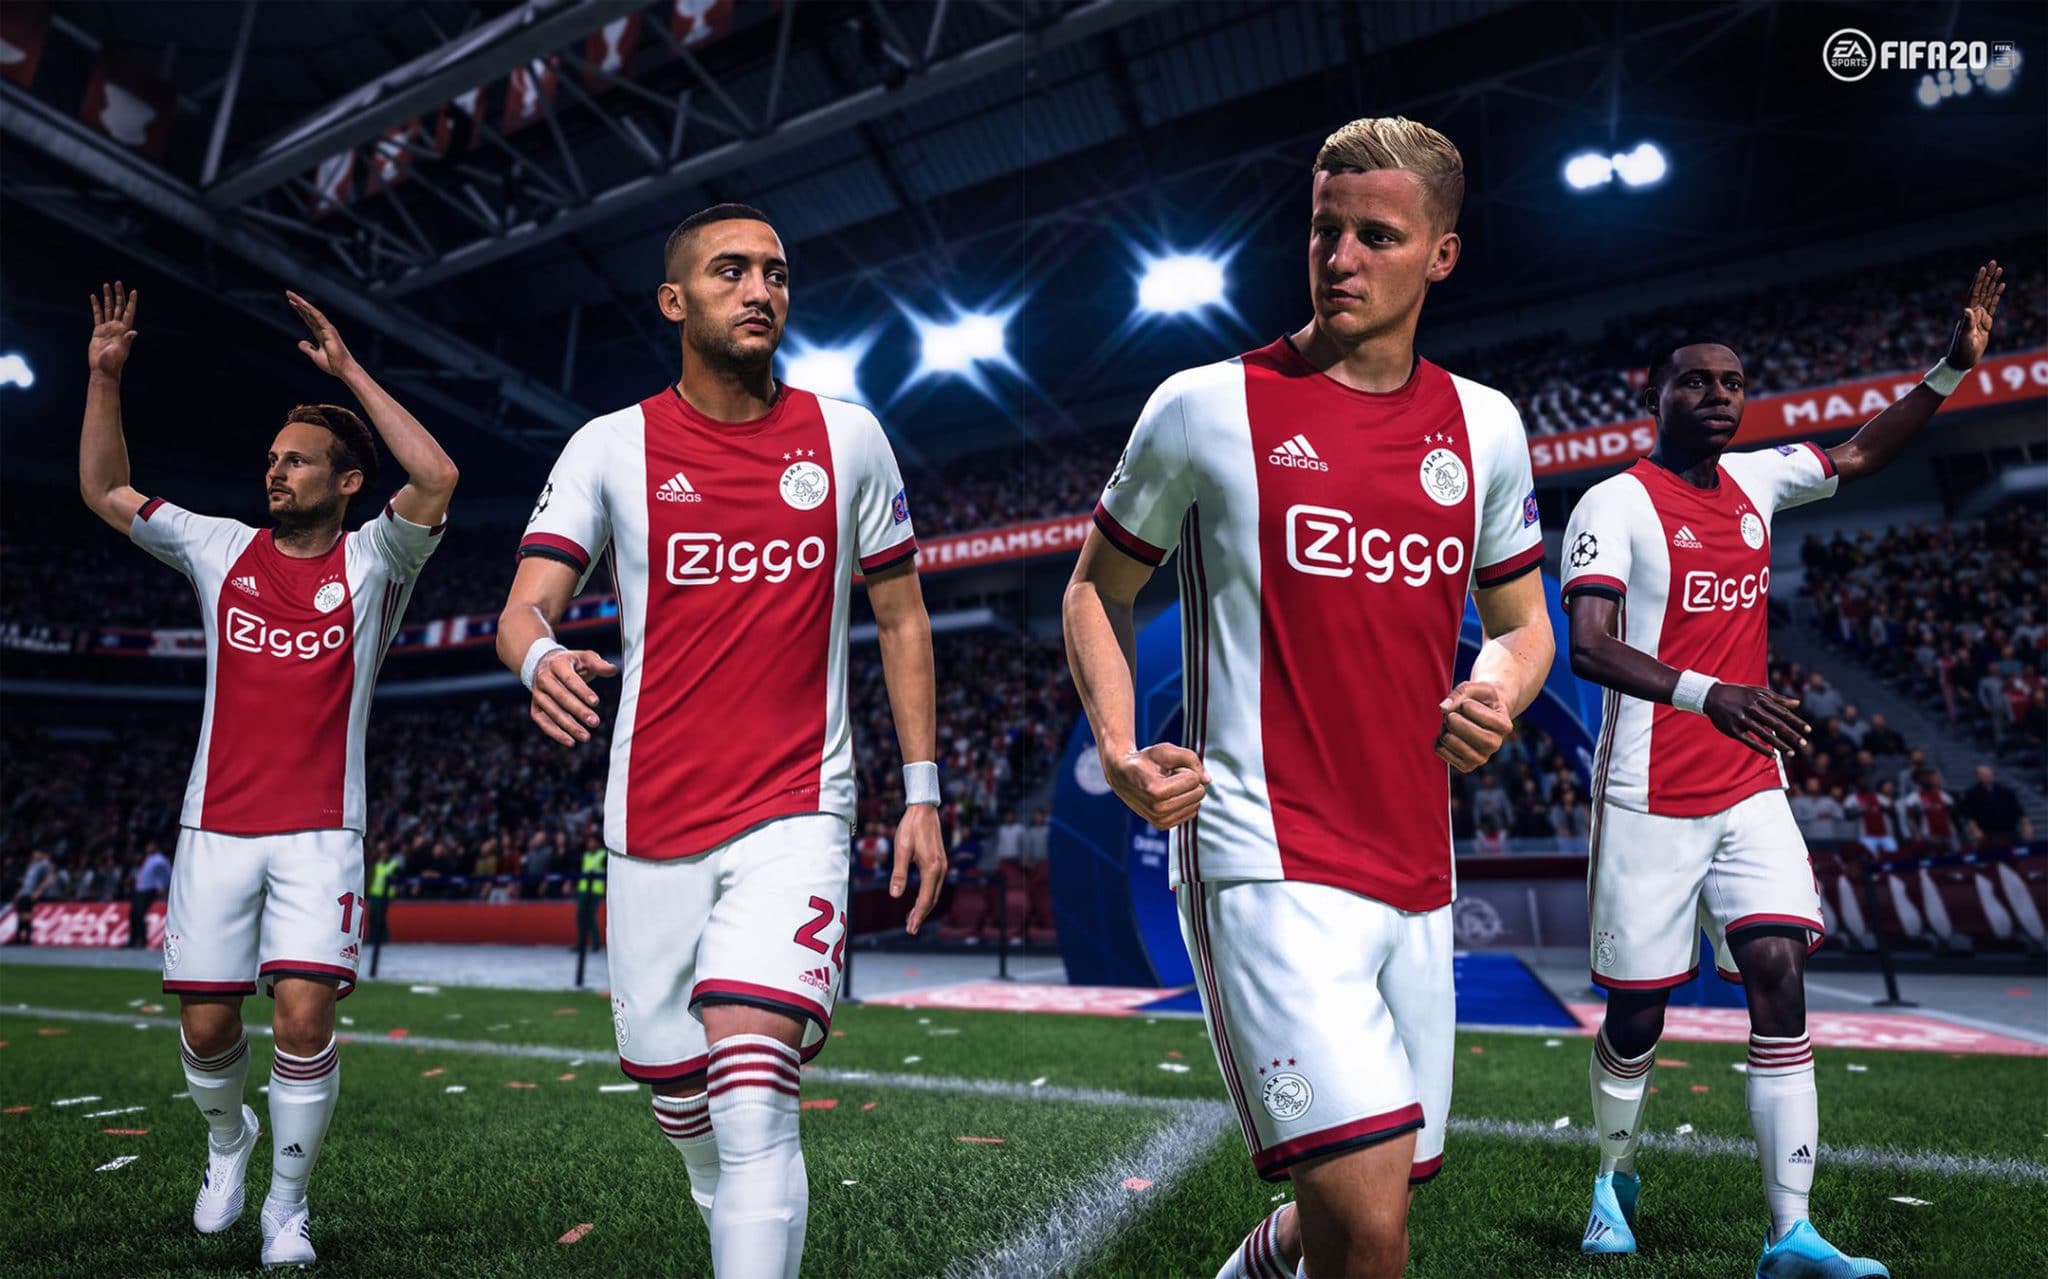 FIFA 20 - Annunciata l'EA Sports Stay and Play Cup 4